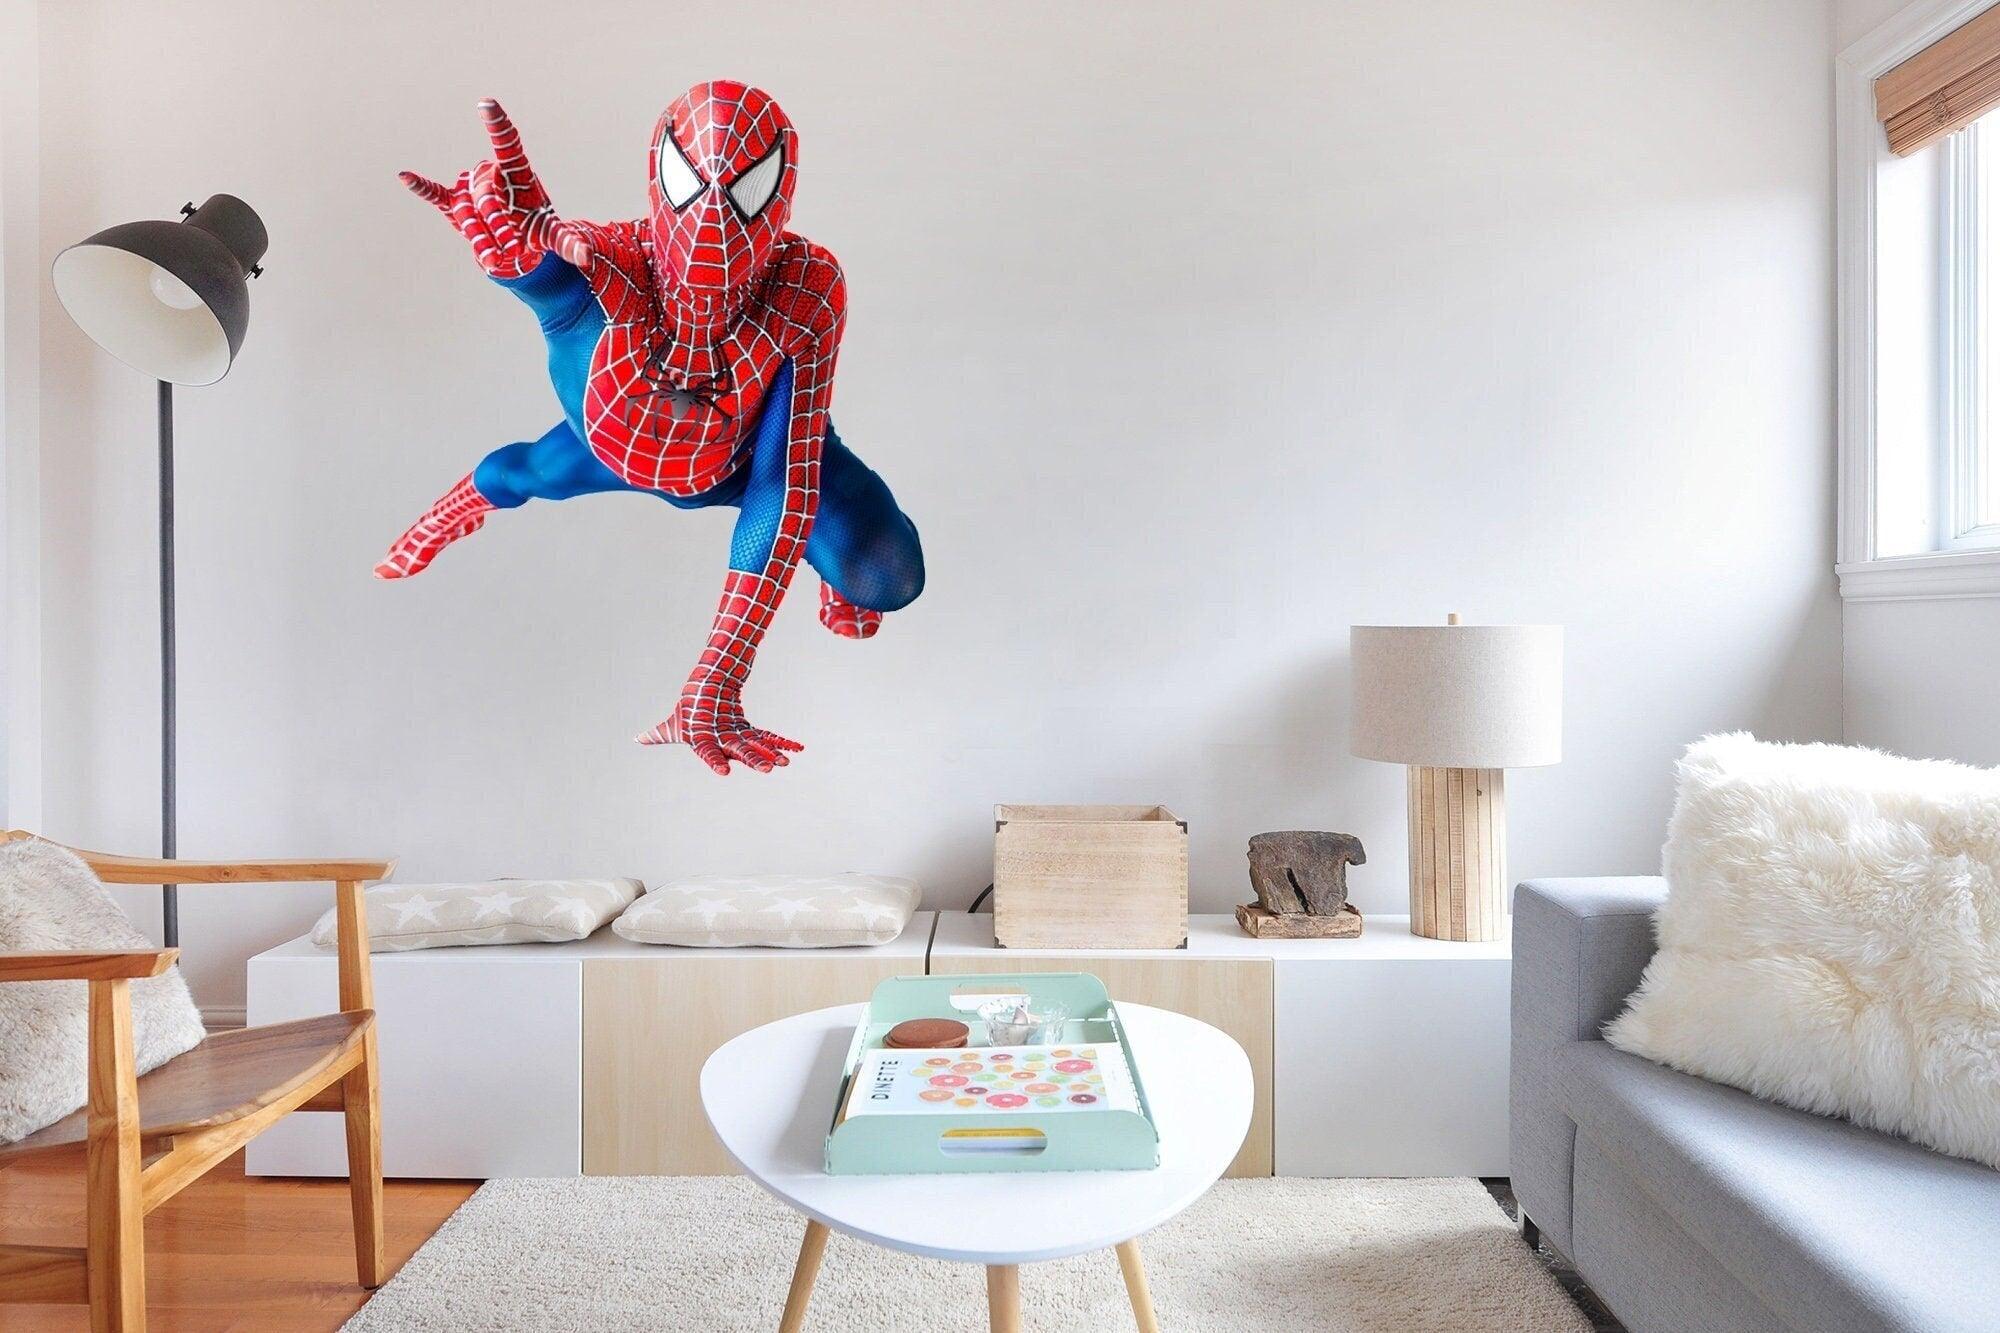 10 Coolest 3D Wall Stickers - Best 3D Bedroom Wall Decals for Bedrooms